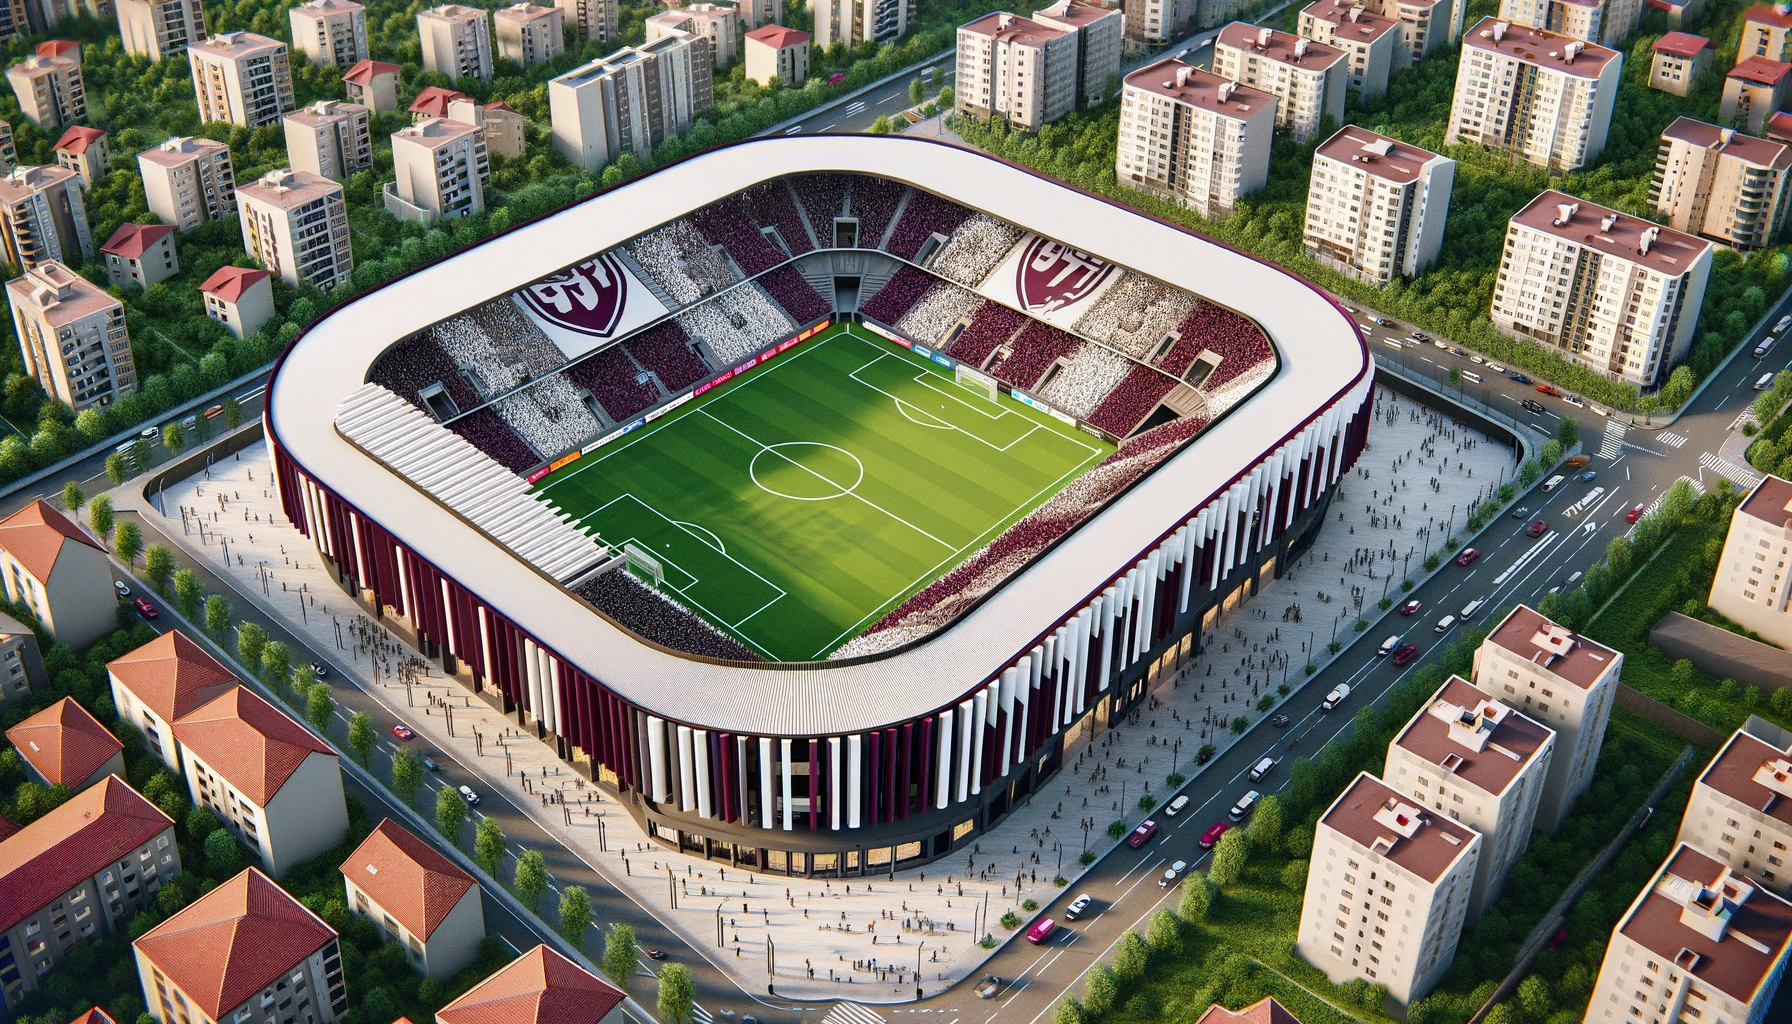 DALL·E 2023-11-20 23.19.52 - A bird's-eye view of a football stadium designed for _İnegölspor_, with burgundy and white as the team colors. The stadium is located in a lively dist